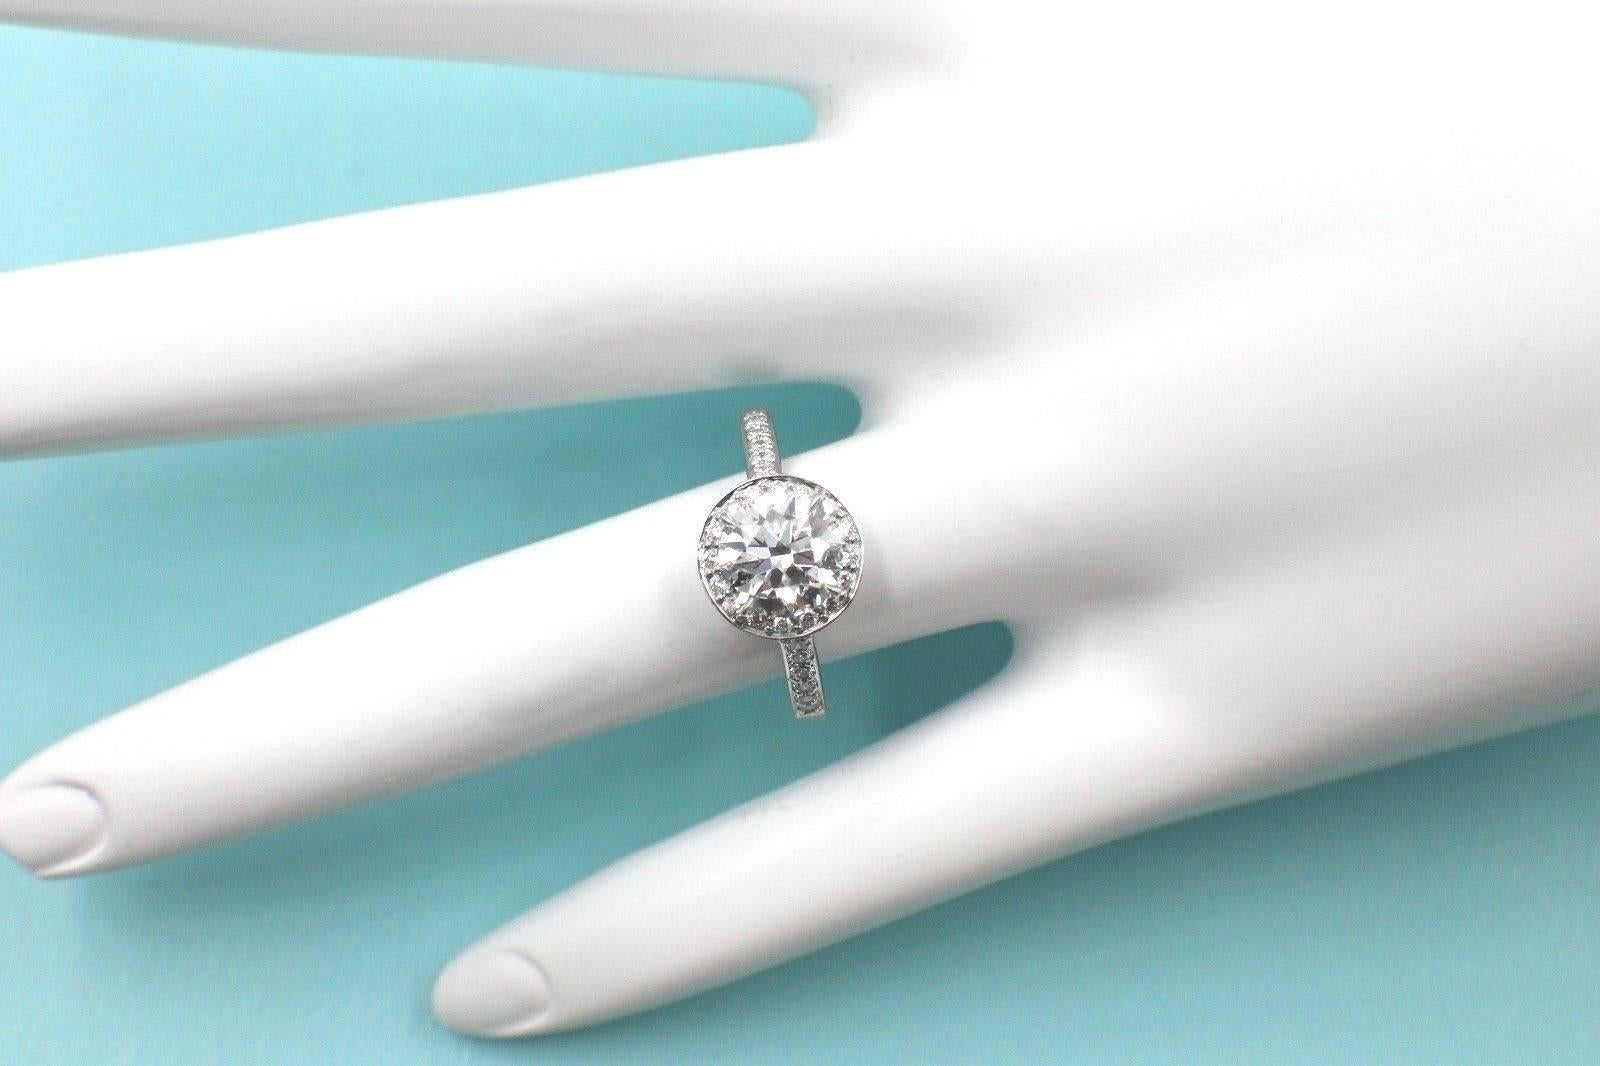 Tiffany & Co Platinum and Diamond Single Row Halo, set with One Round Brilliant Cut Diamond 1.29 CTS, G color, VS2 clarity with a crown inscription of 